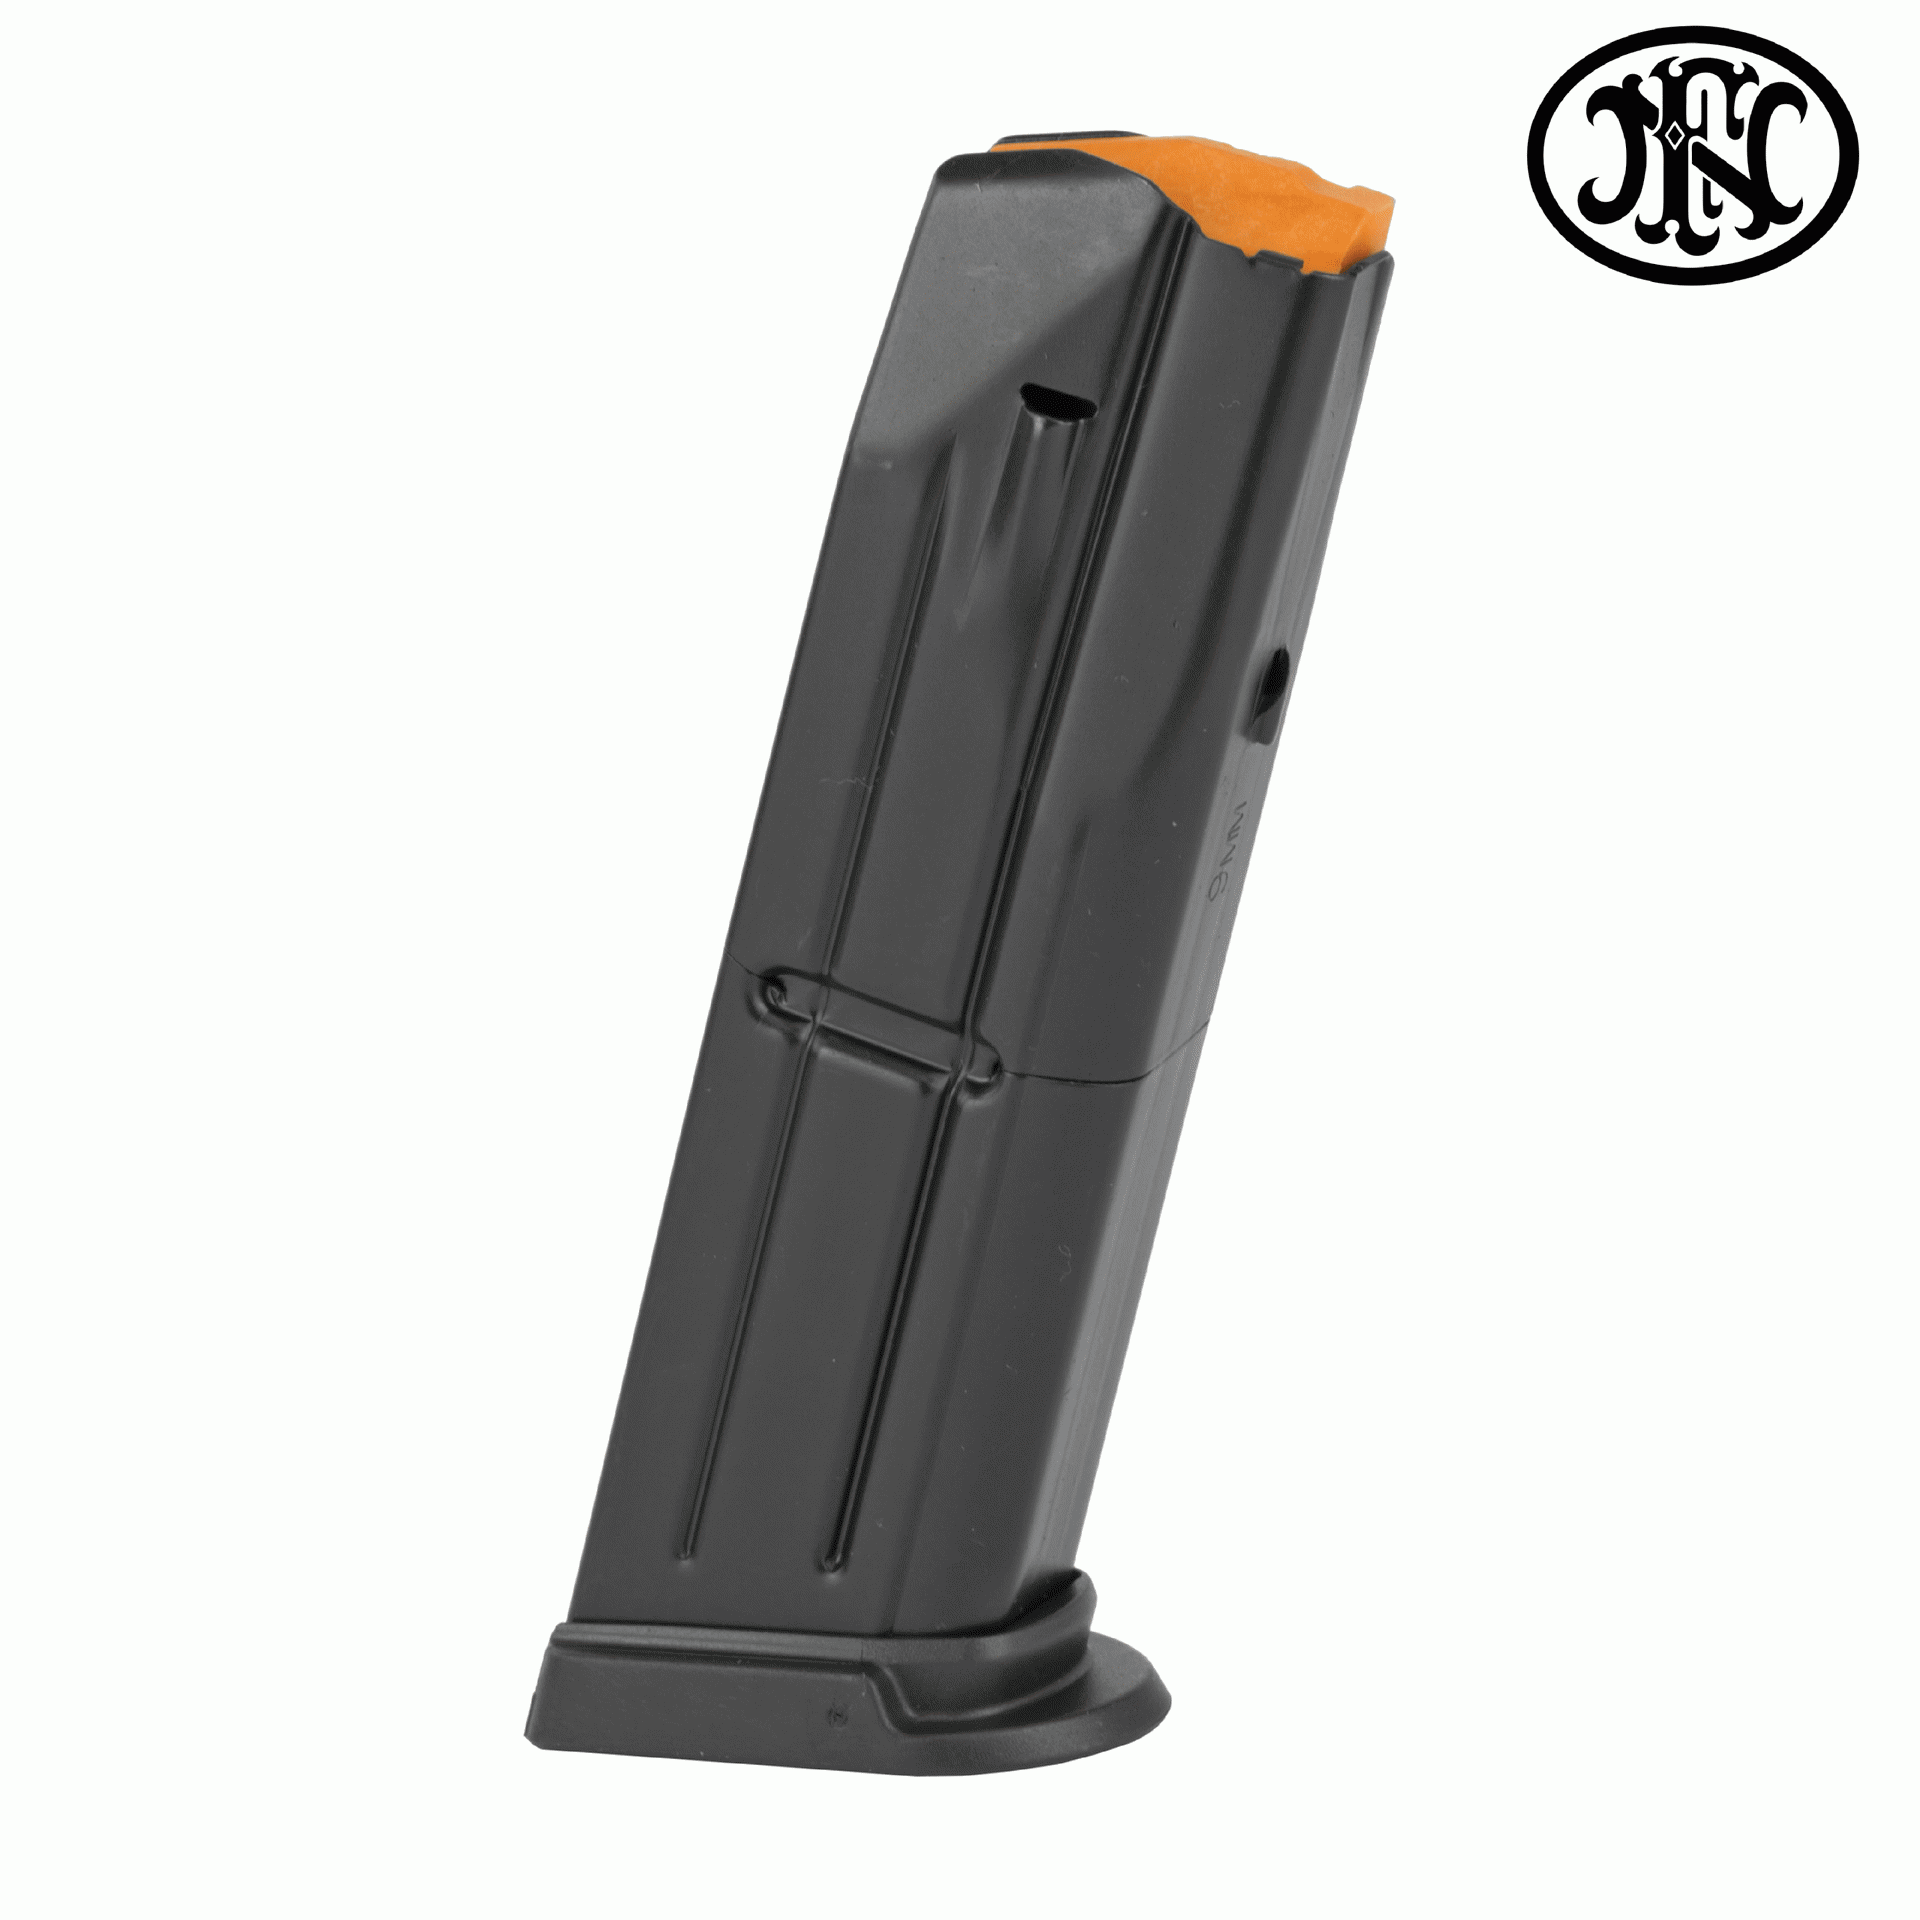 FNH FN 509 Magazine 10 Rd 9mm Mag Clip for sale online 